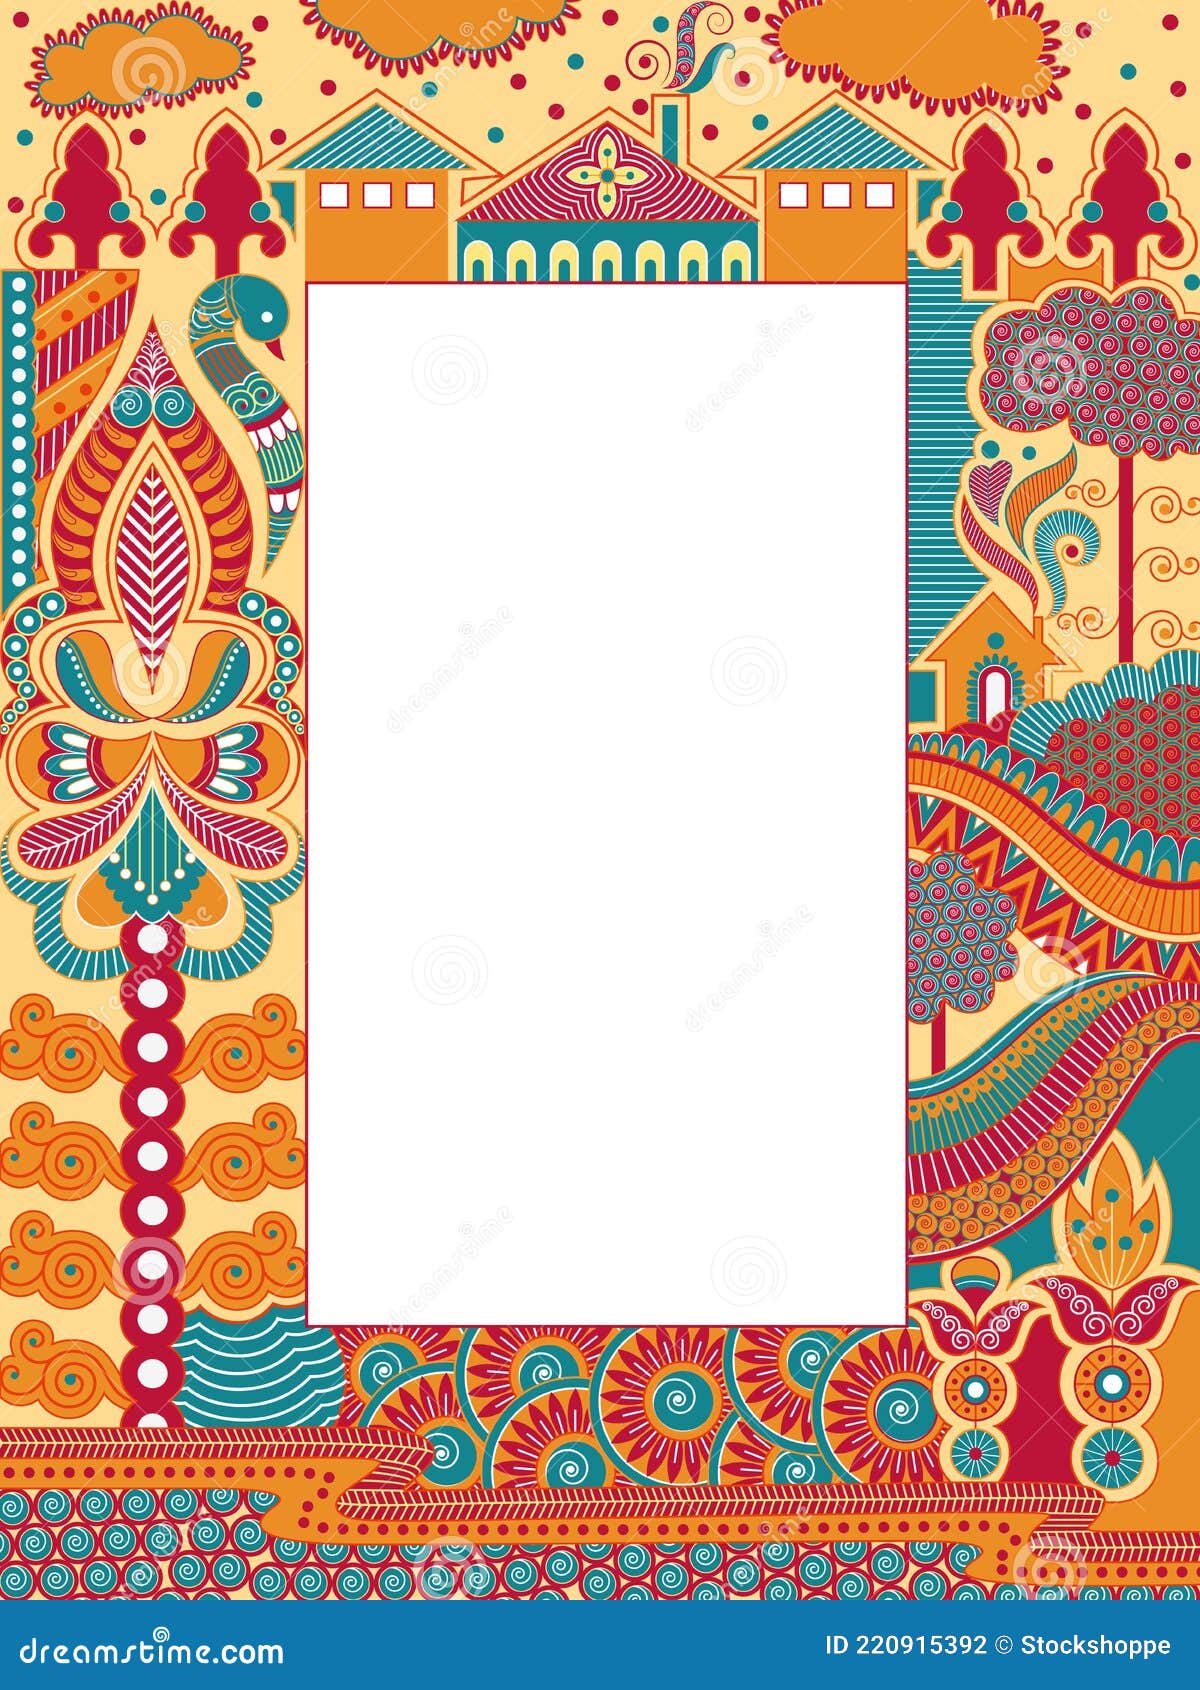 Russian Mural Floral Design Background Template for Greetings and Invitation  Card Stock Vector - Illustration of national, background: 220915392